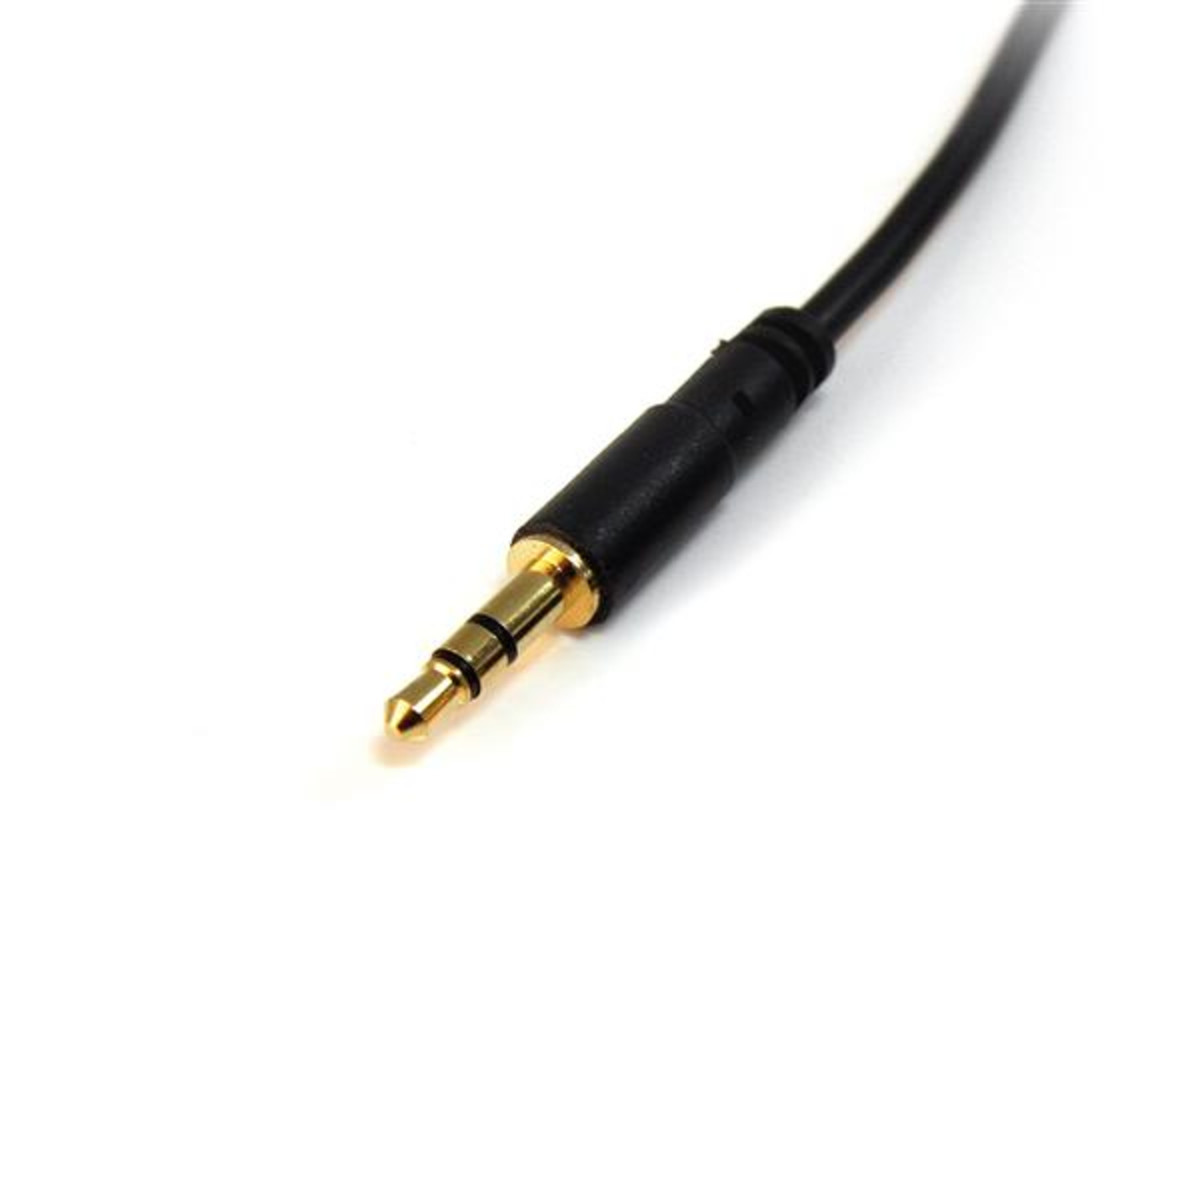 10 ft Slim 3.5mm Stereo Audio Cable